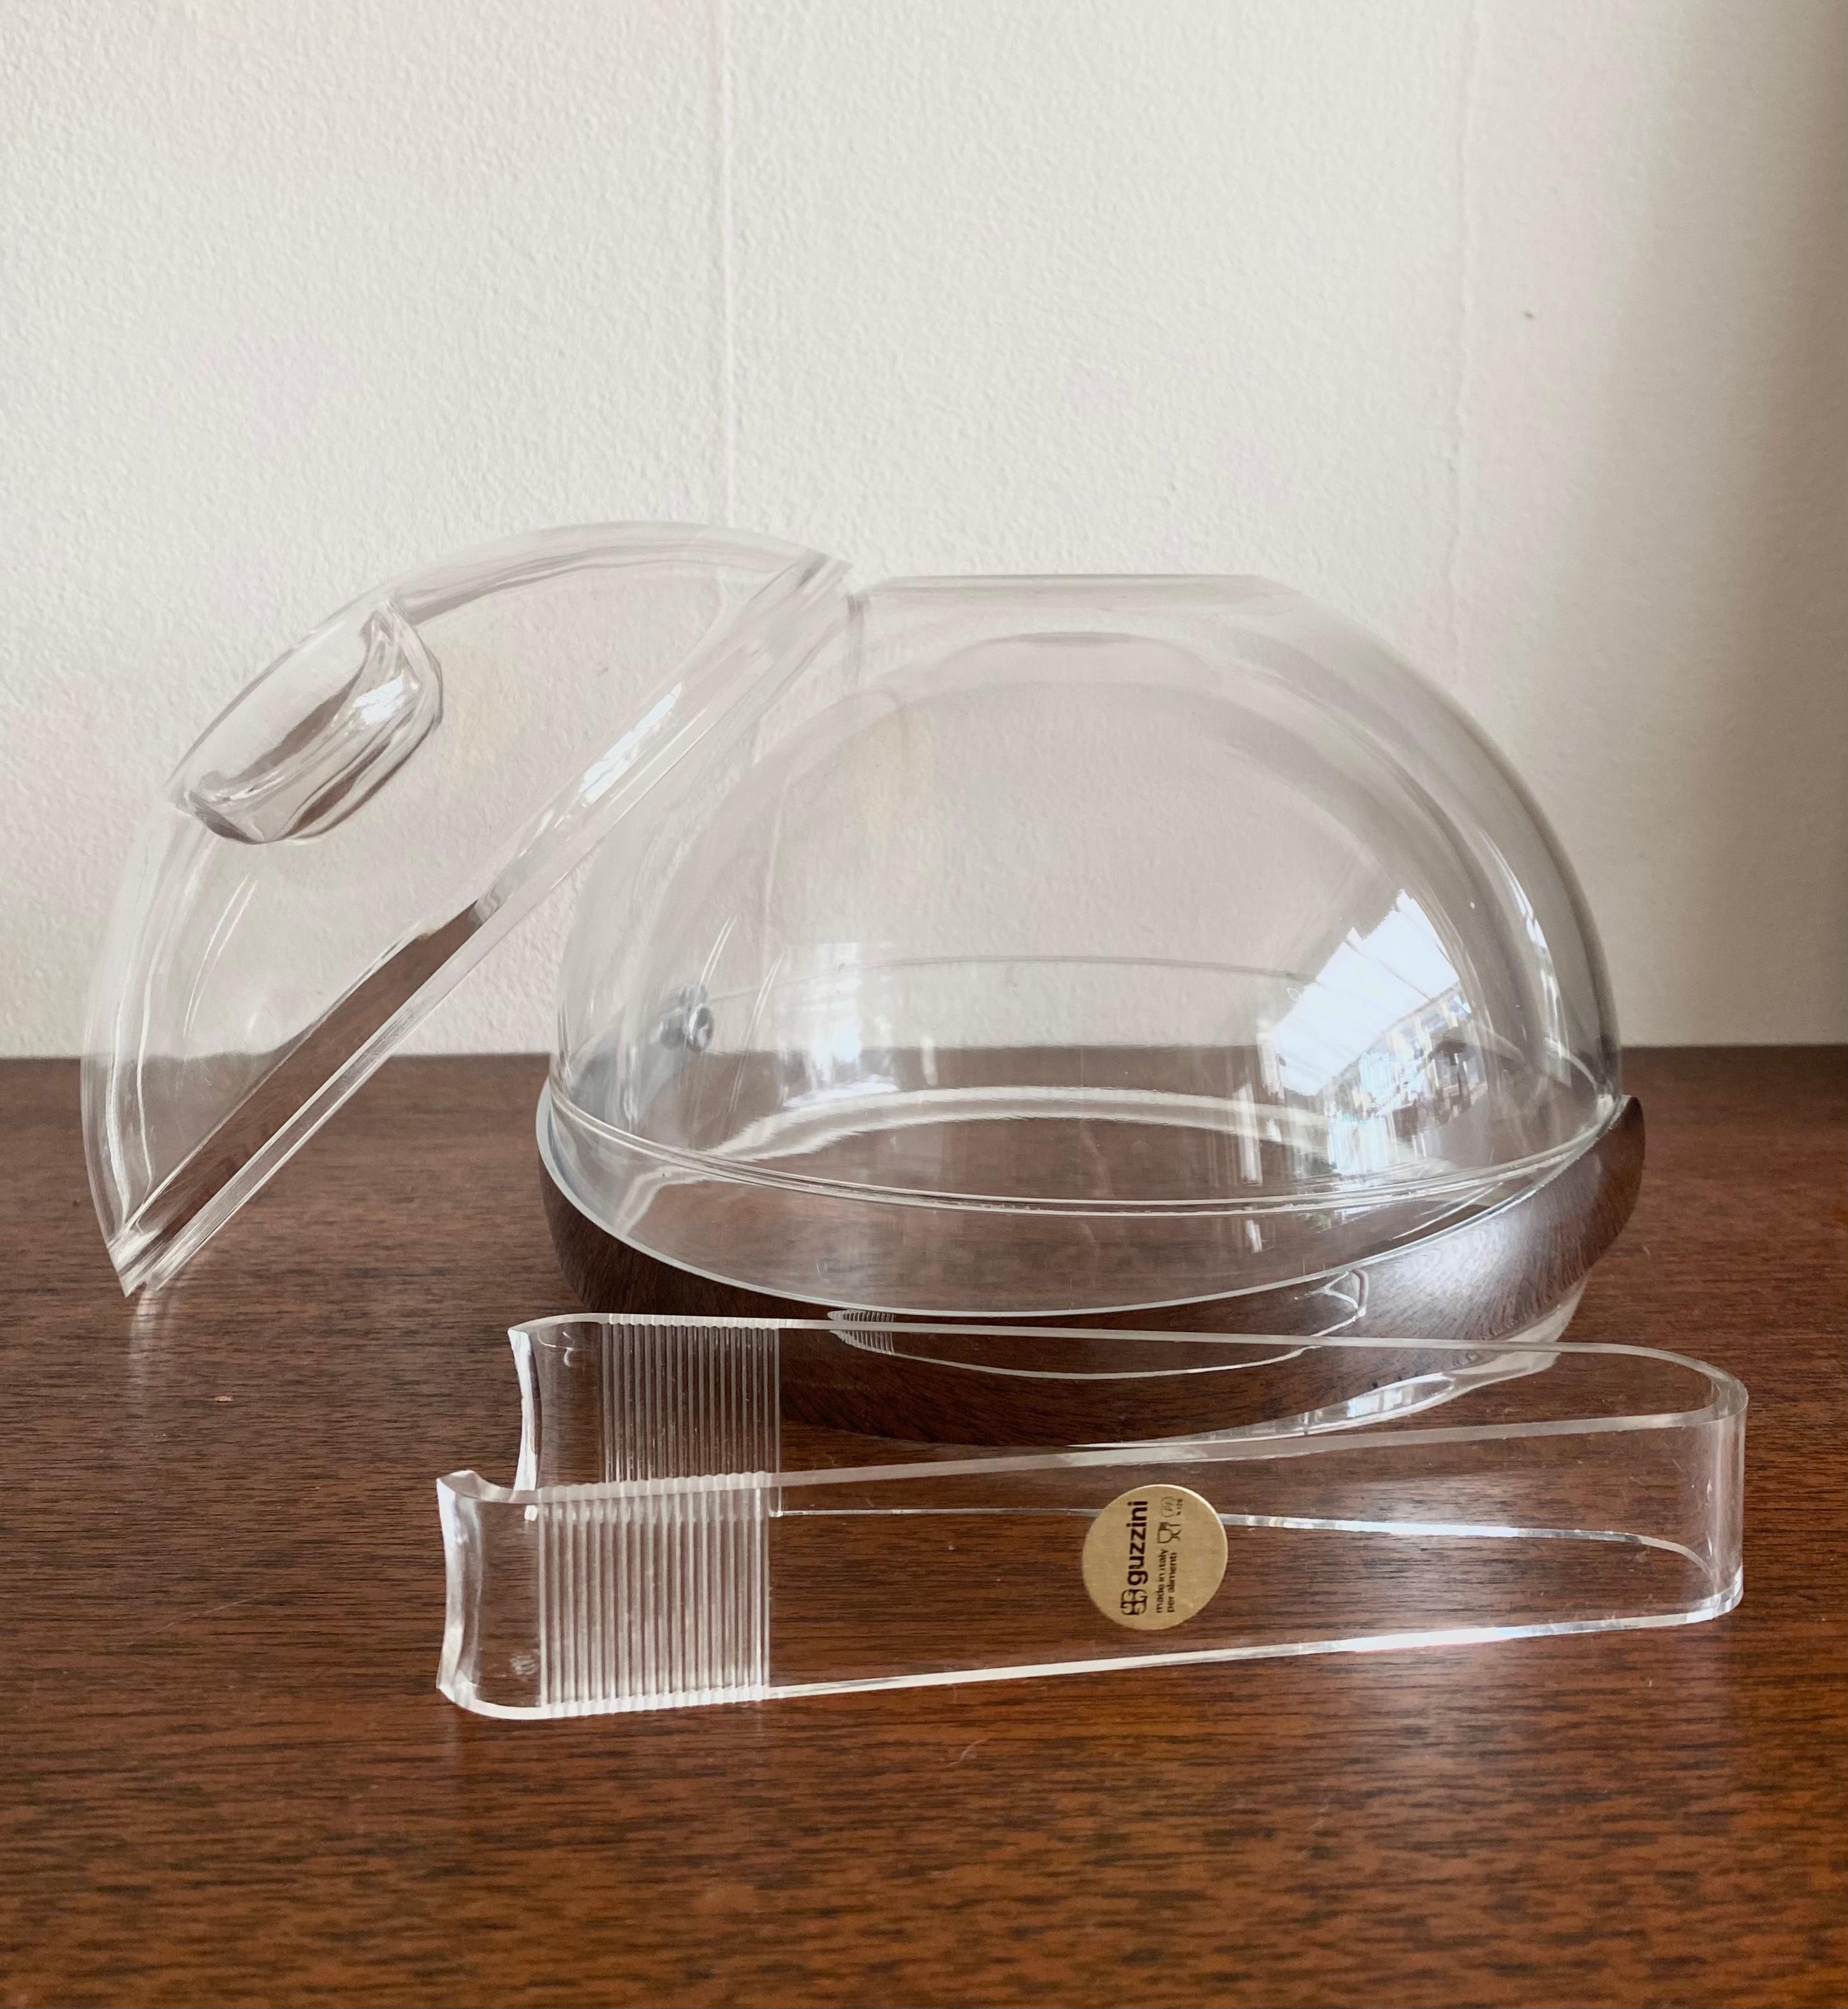 Lucite Space Age Icebucket Model Stella by Paolo Tilche for Guzzini, 1970s For Sale 1